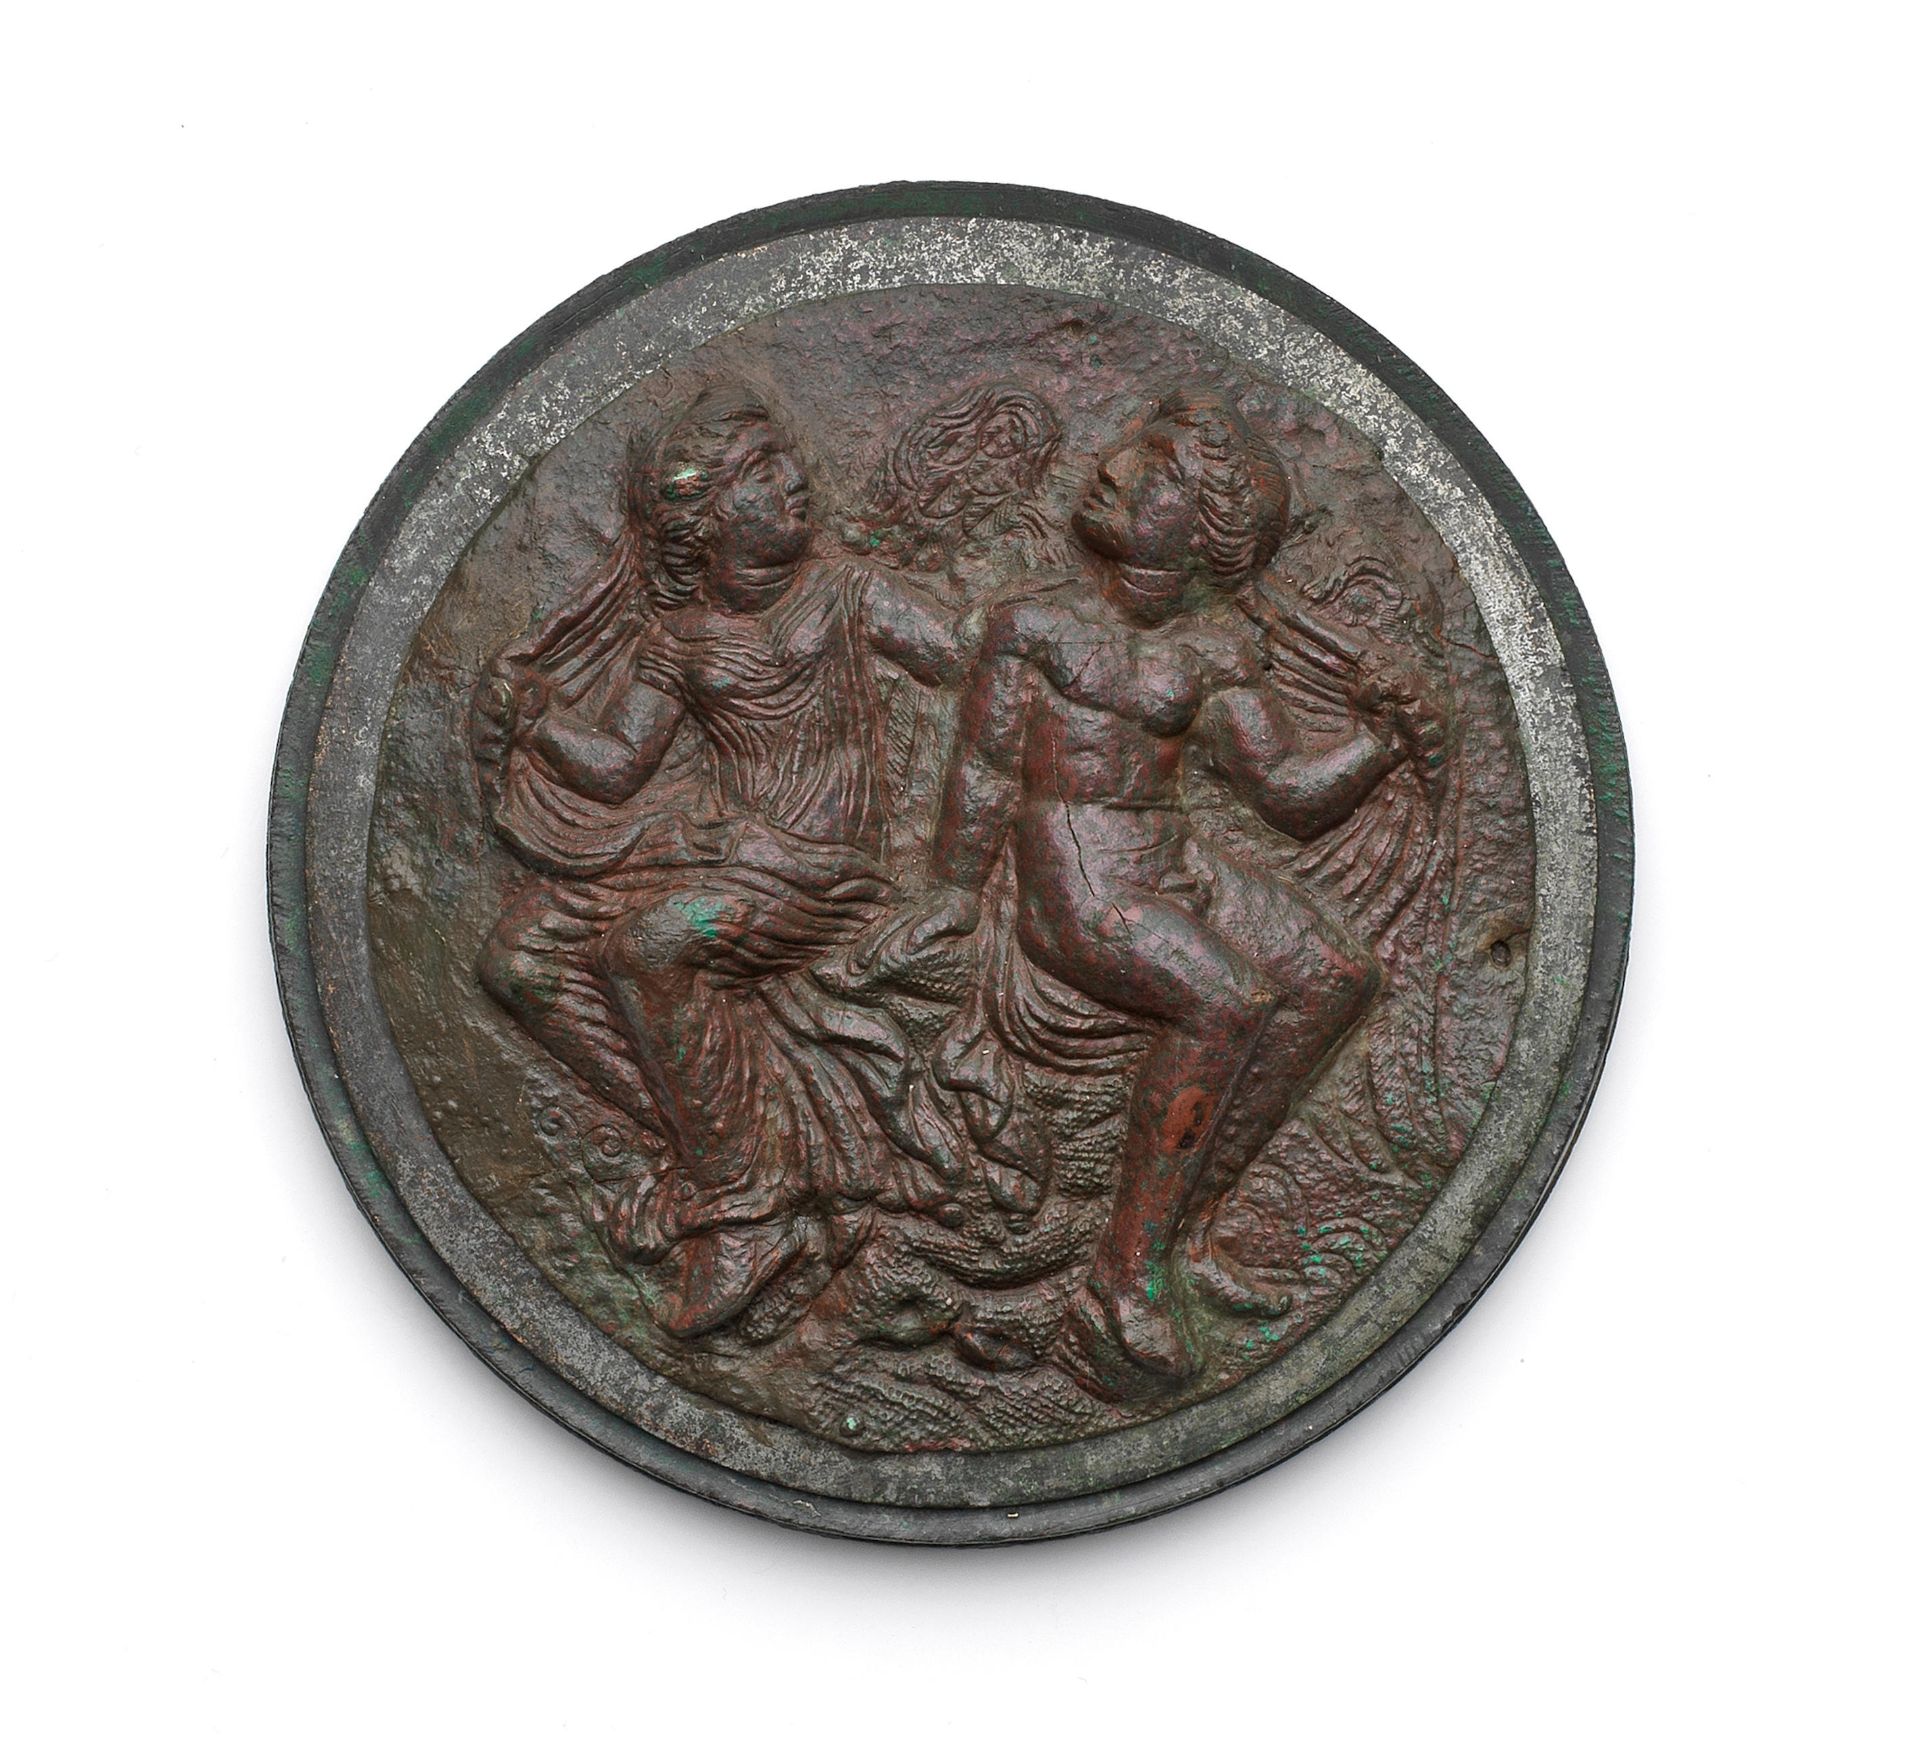 A Hellenistic bronze mirror cover